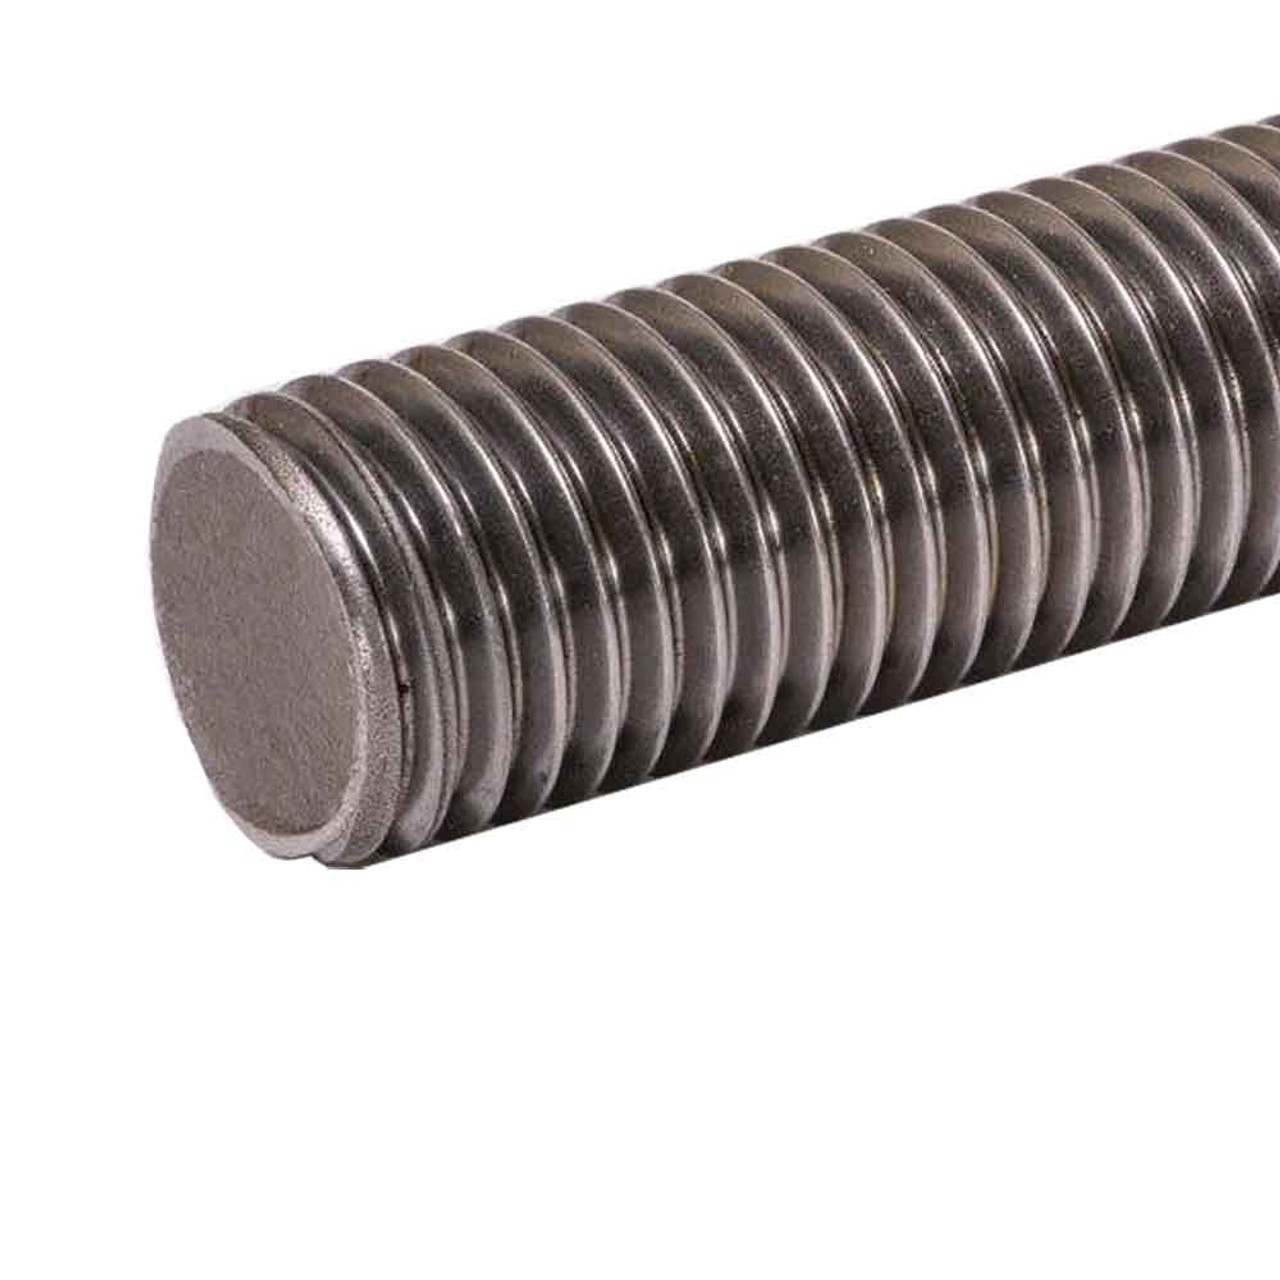 1/2 - 13 TPI x 72 inches, Low Carbon Steel Threaded Rod, Zinc Coated